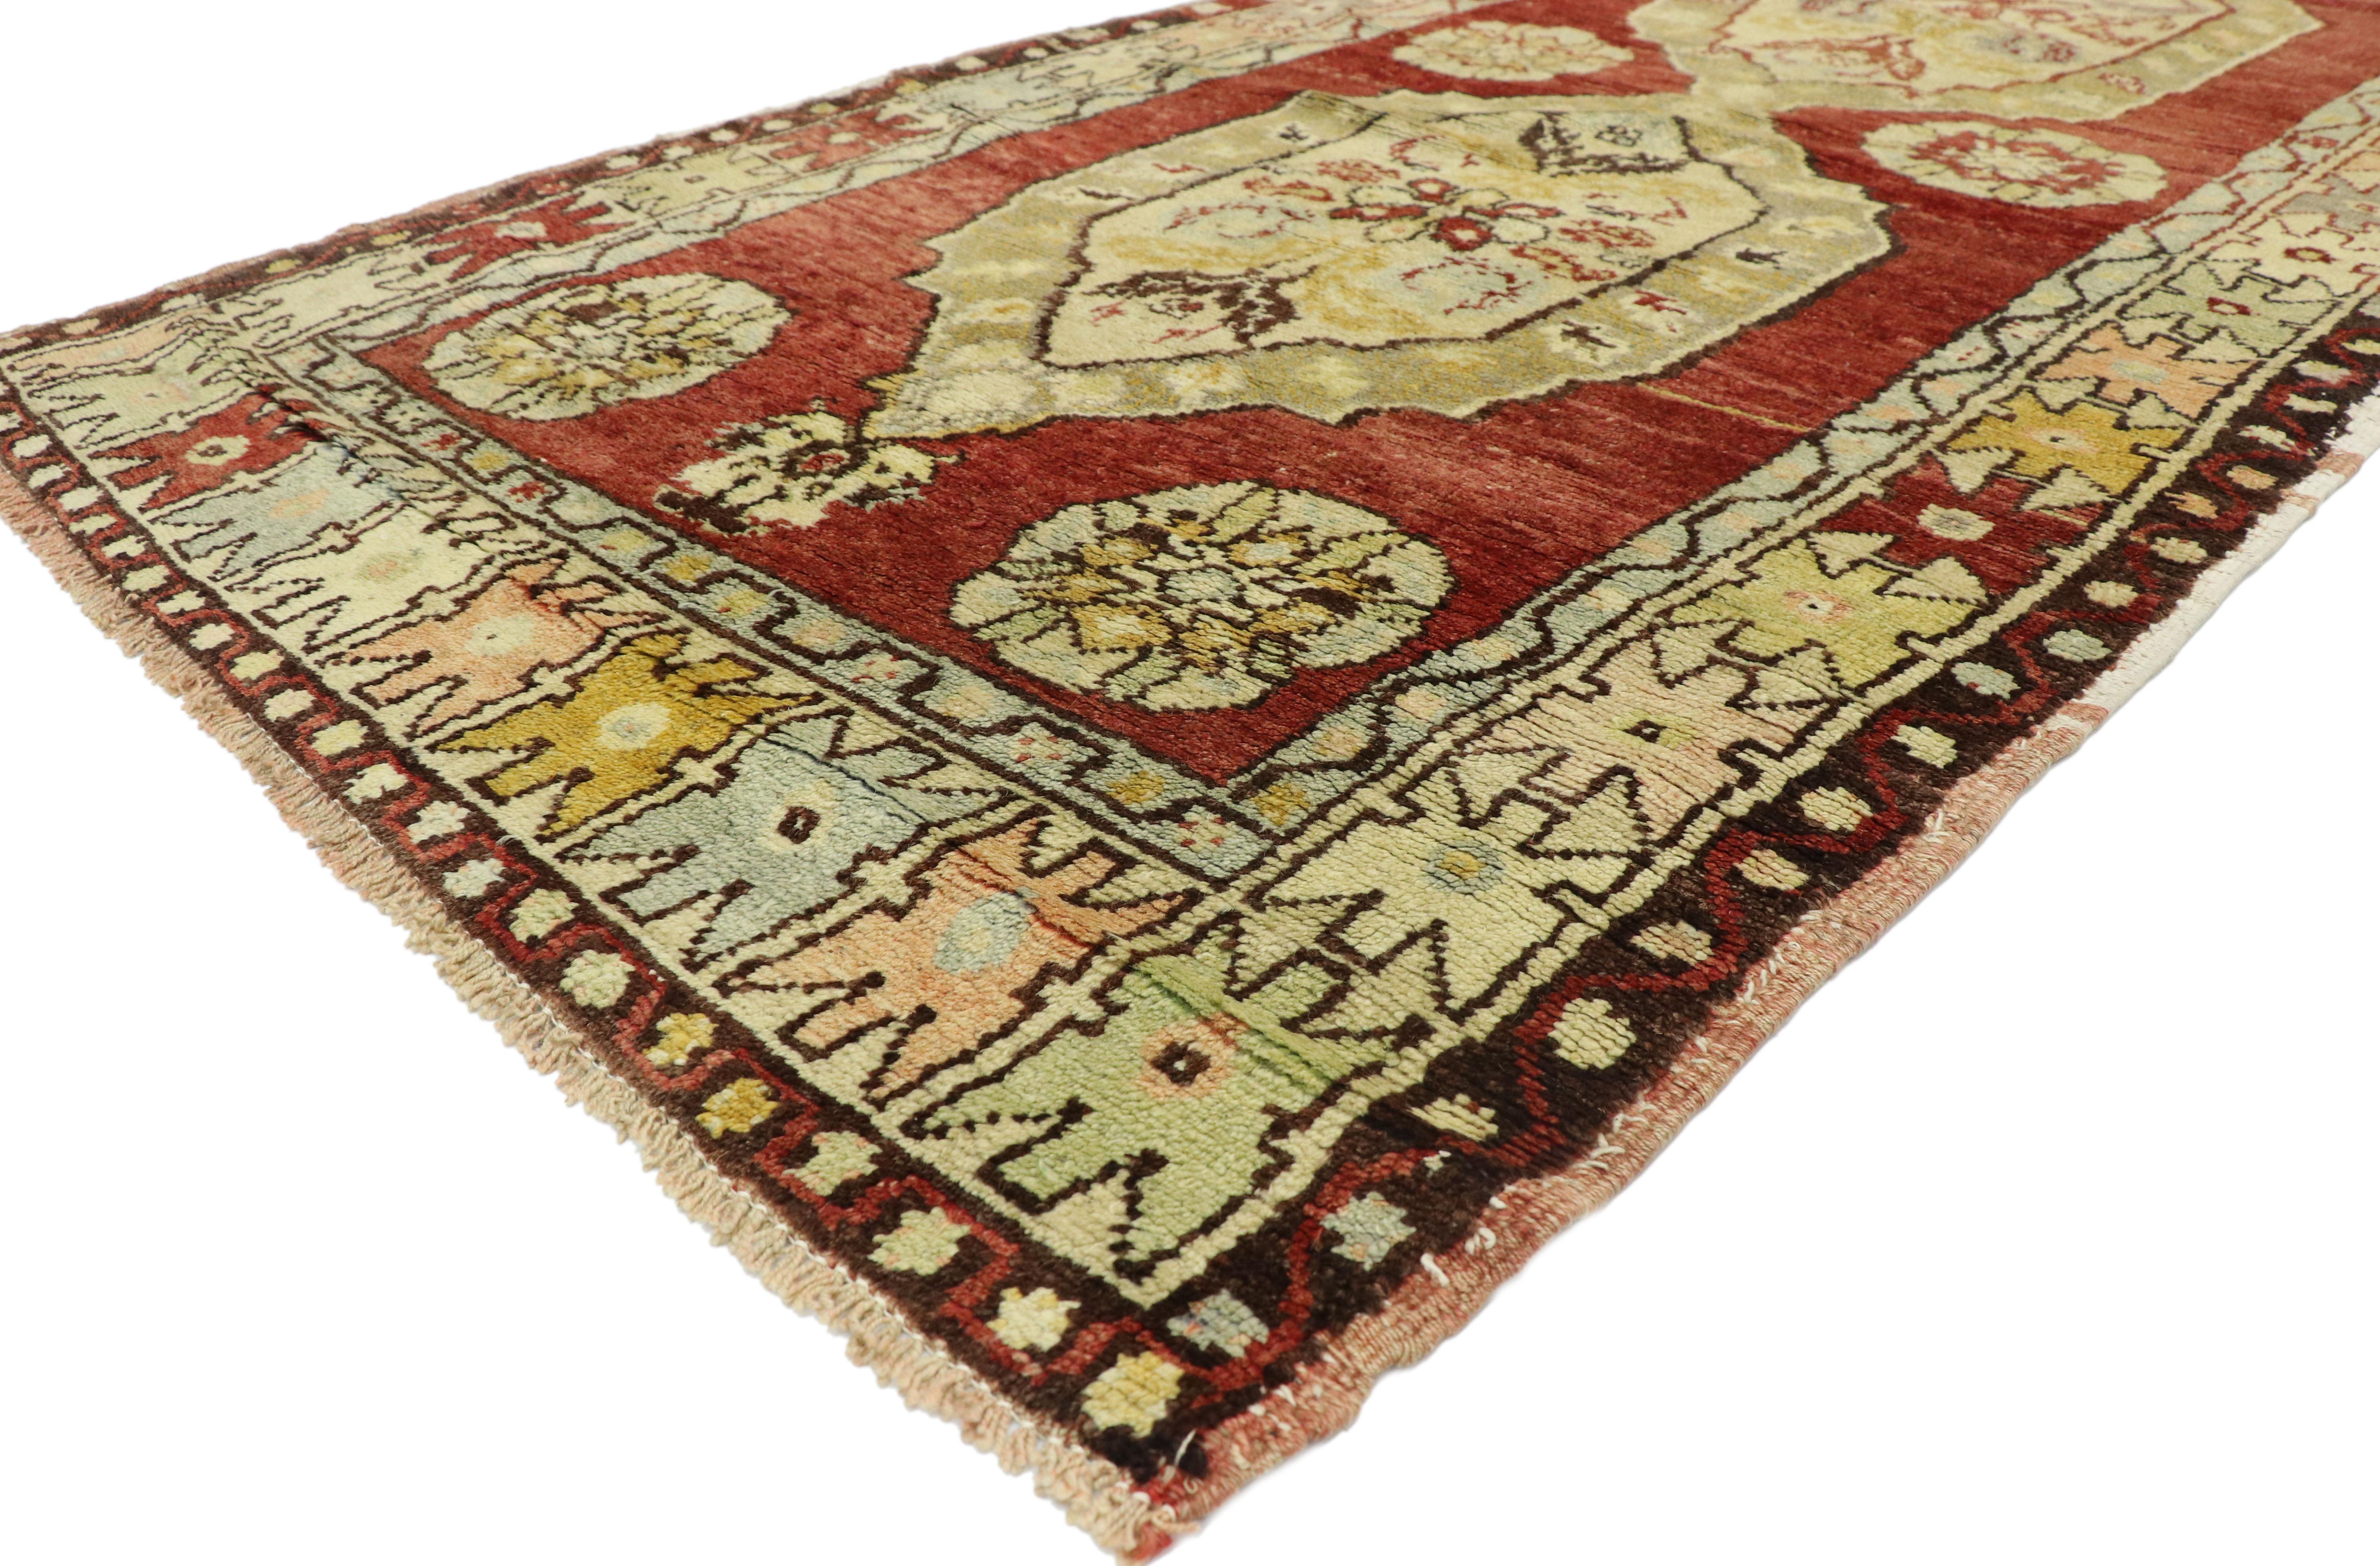 52121, rustic style vintage Turkish Oushak runner, hallway runner. This hand knotted wool vintage Turkish Oushak runner features three connected hexagonal medallions capped with palmette pendants spread across an abrashed red field. Each medallion